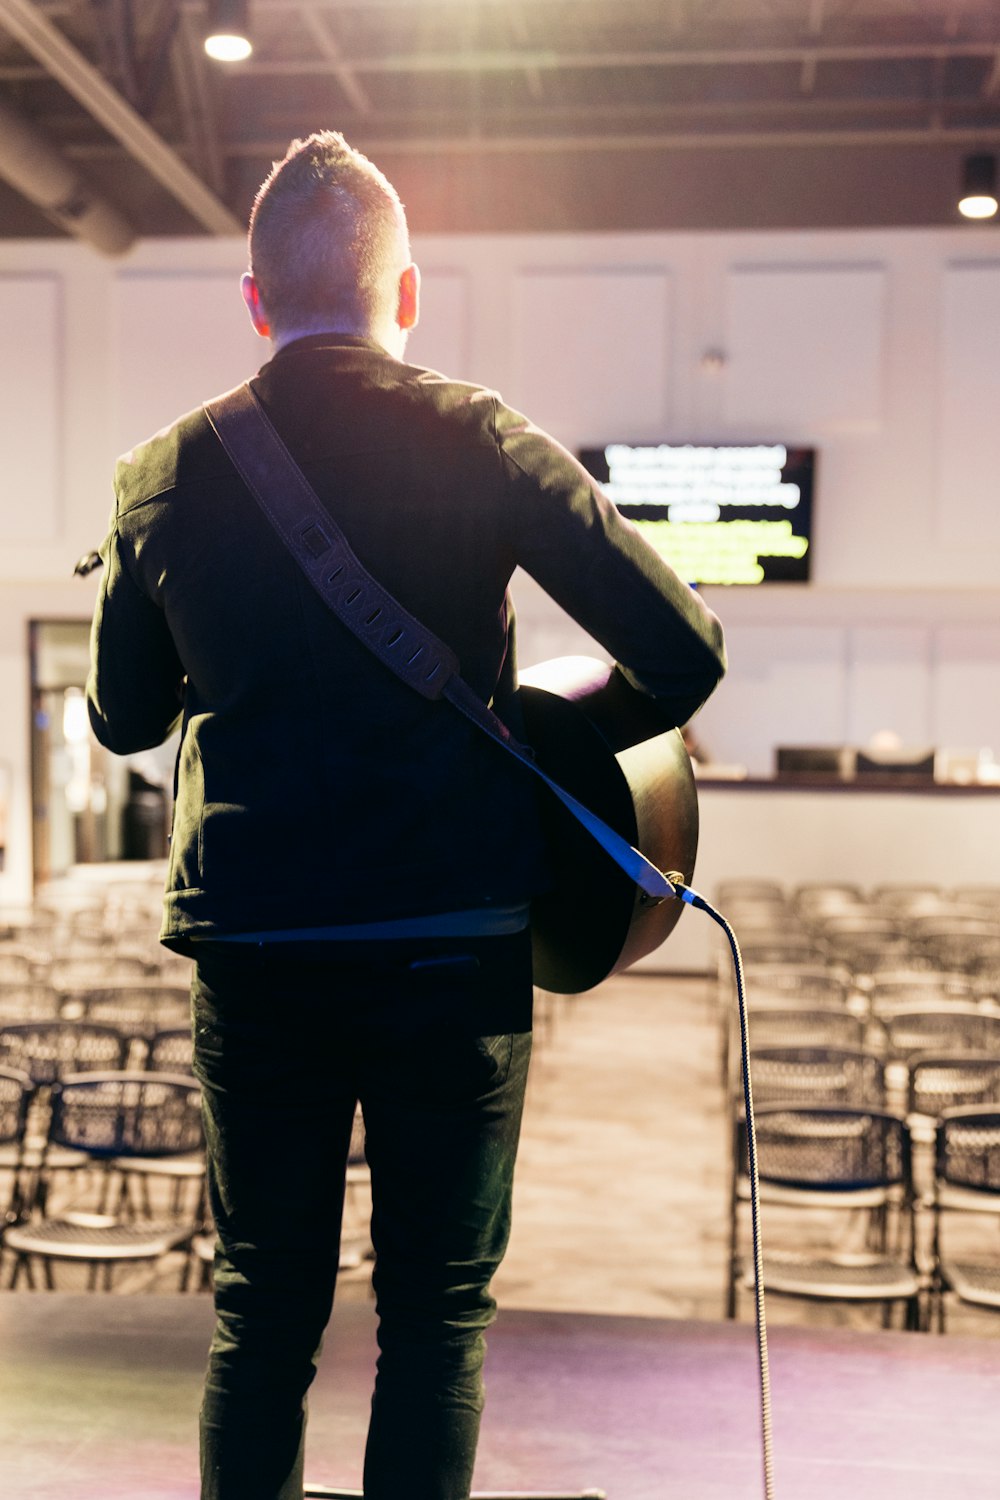 a man with a guitar stands in front of rows of chairs